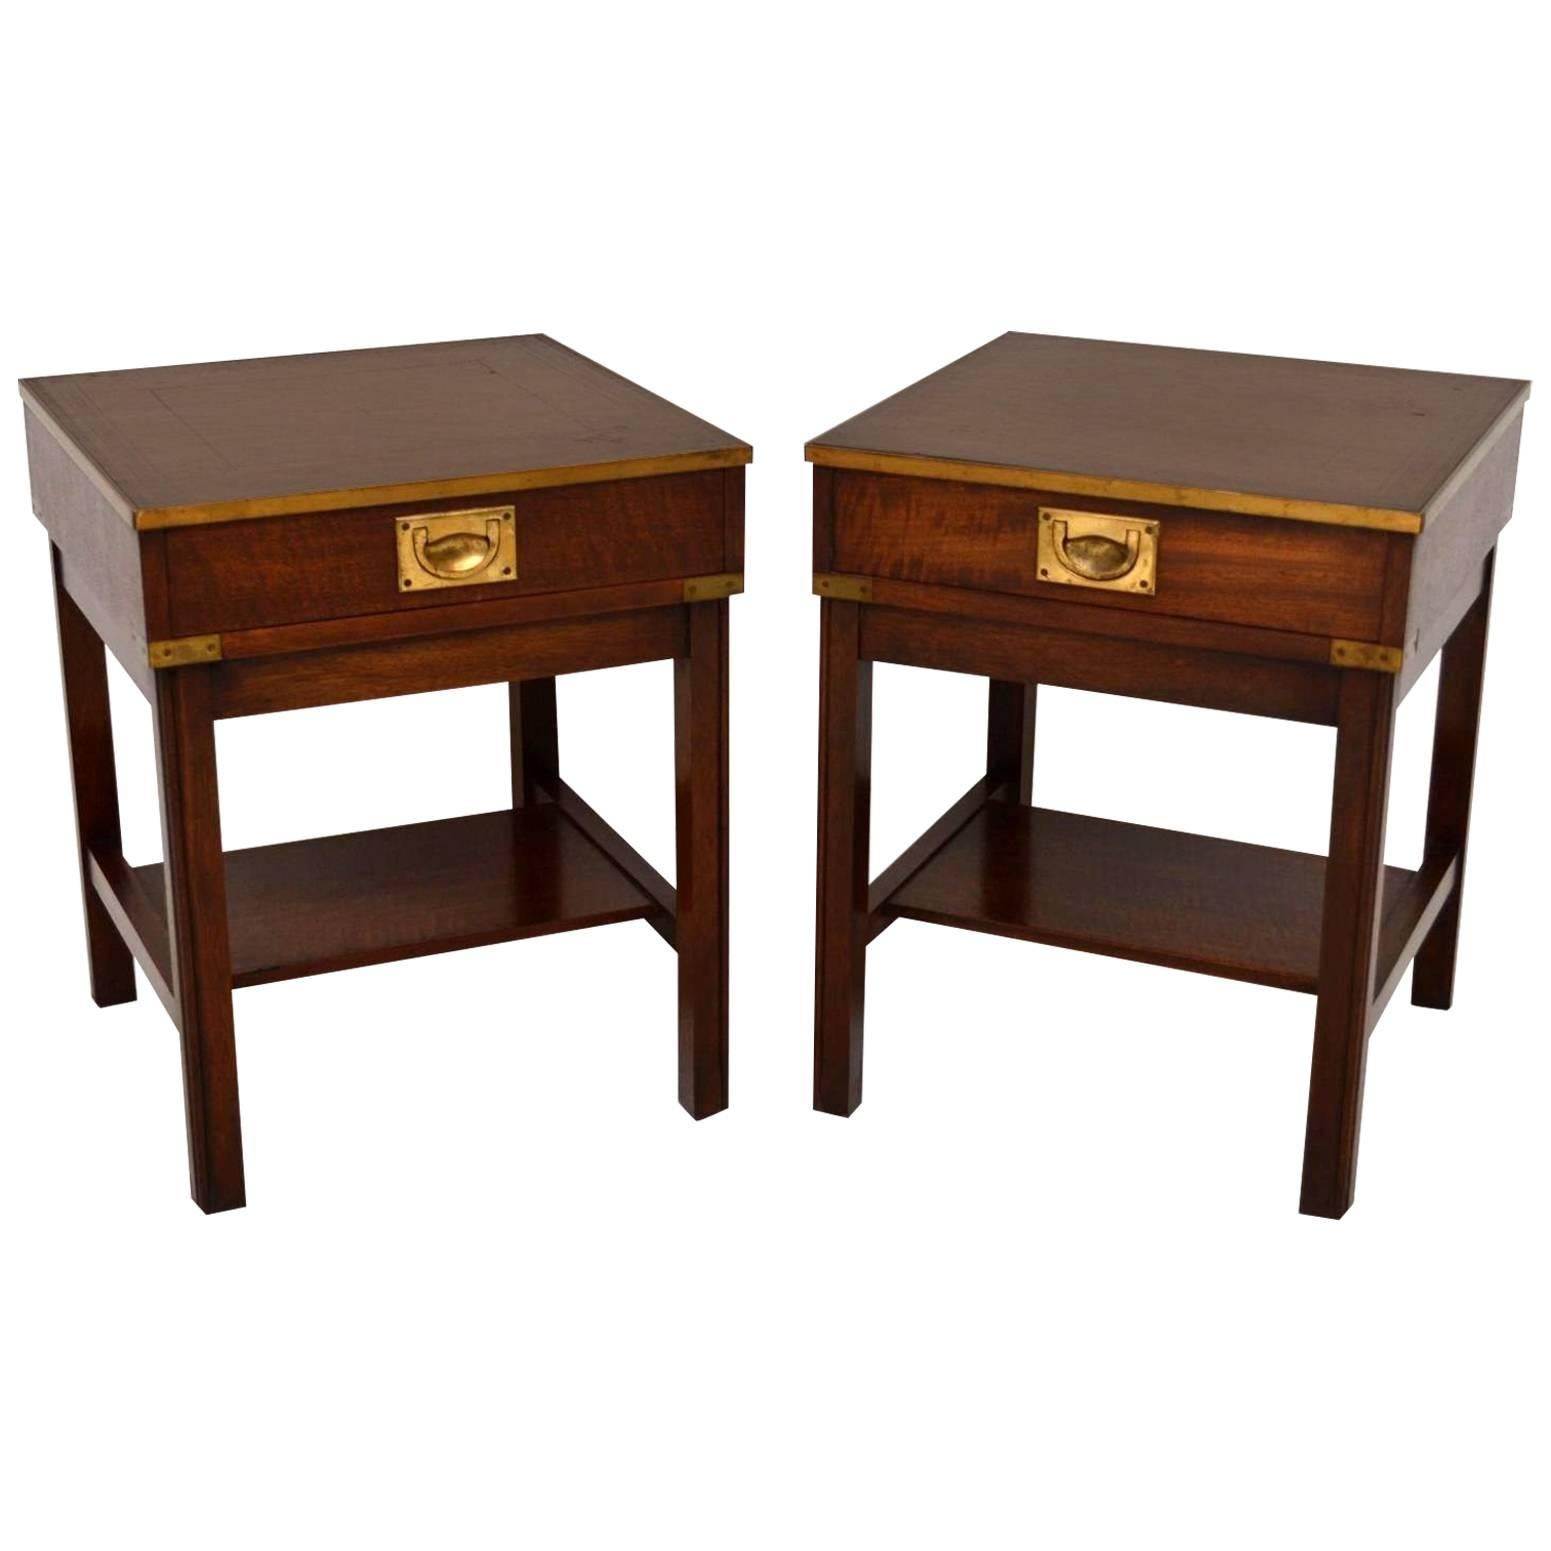 Pair of Antique Campaign Style Mahogany Side Tables